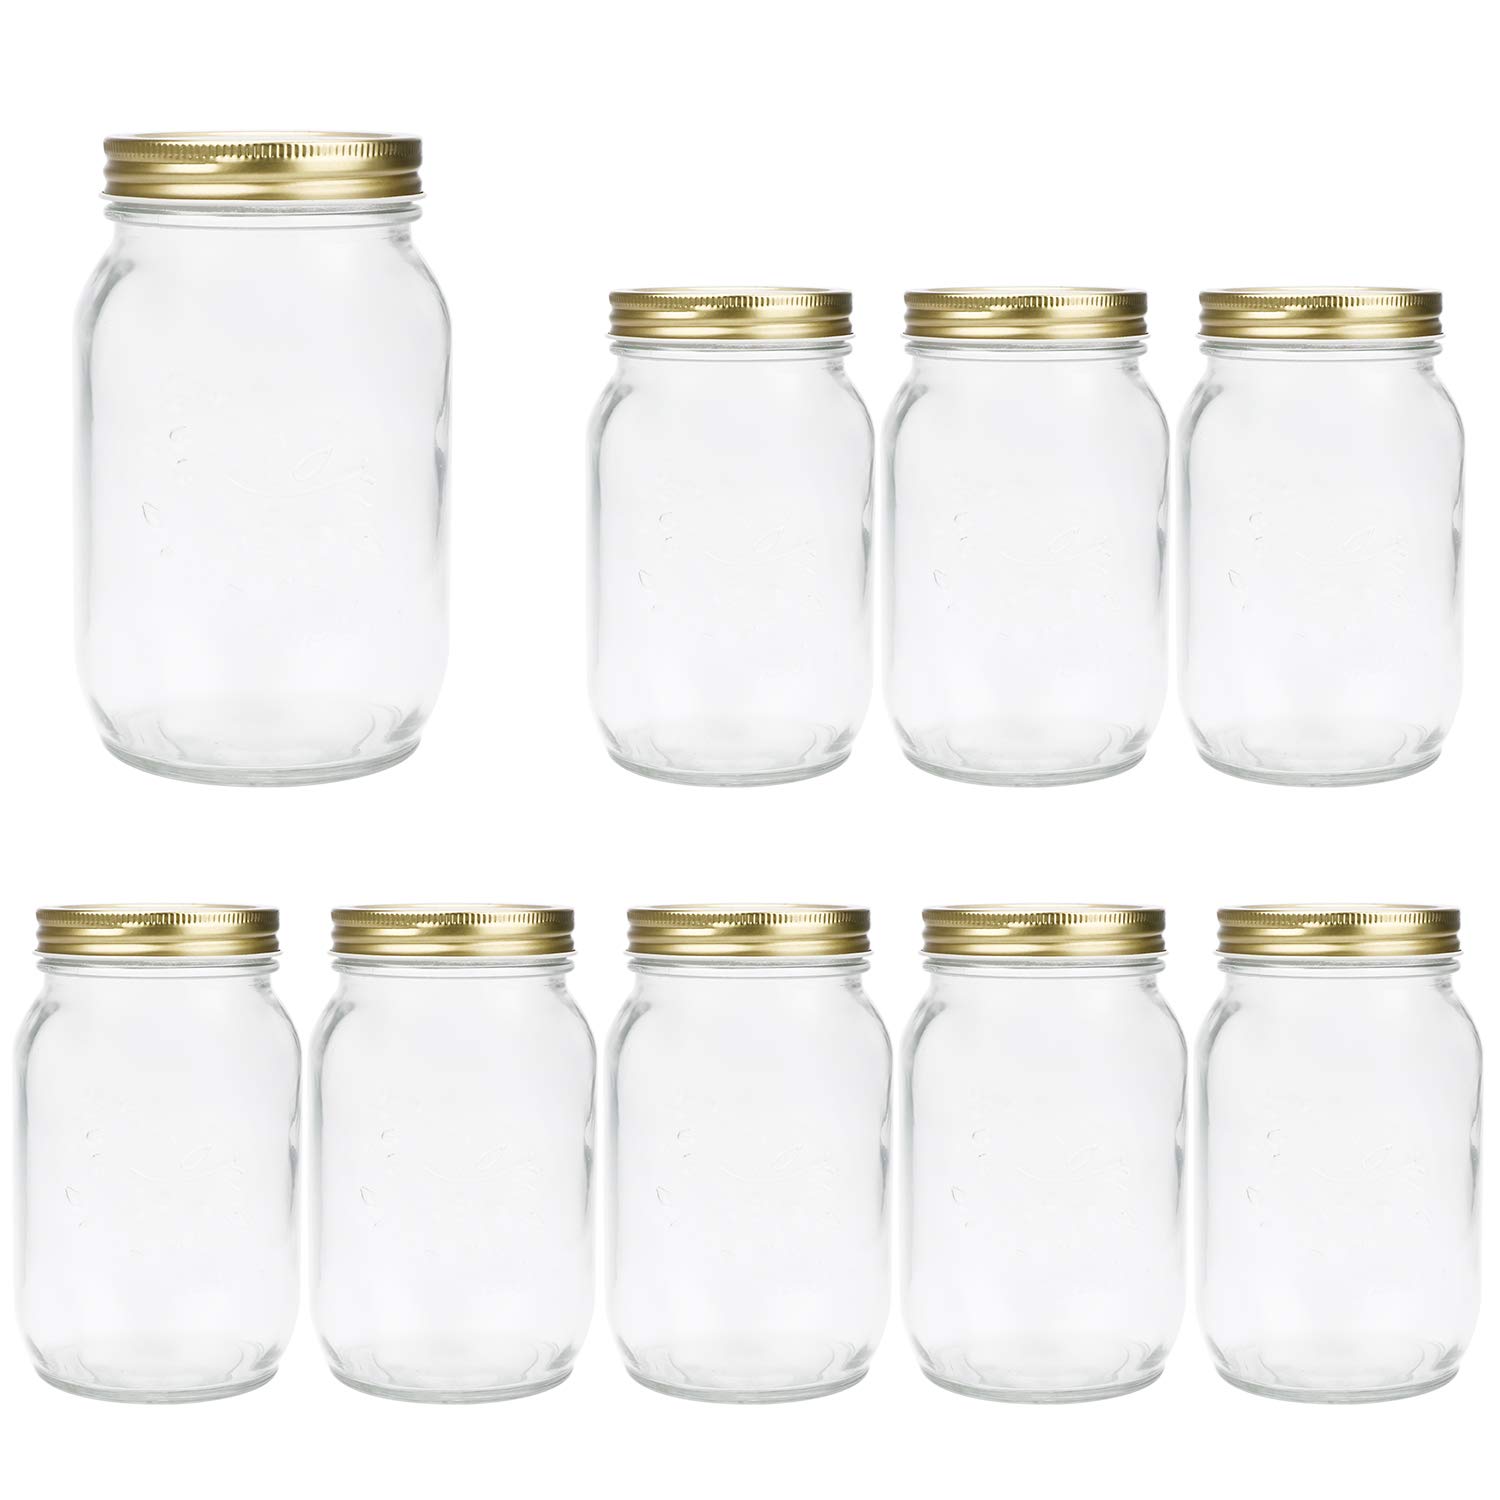 32 oz Glass Jars With Lids,Encheng Wide Mouth Ball Mason Jars 1000ml,Canning Jars For Pickles,Herb,Jelly,Jams,Honey,Glass Storage Jars Kitchen Cani...